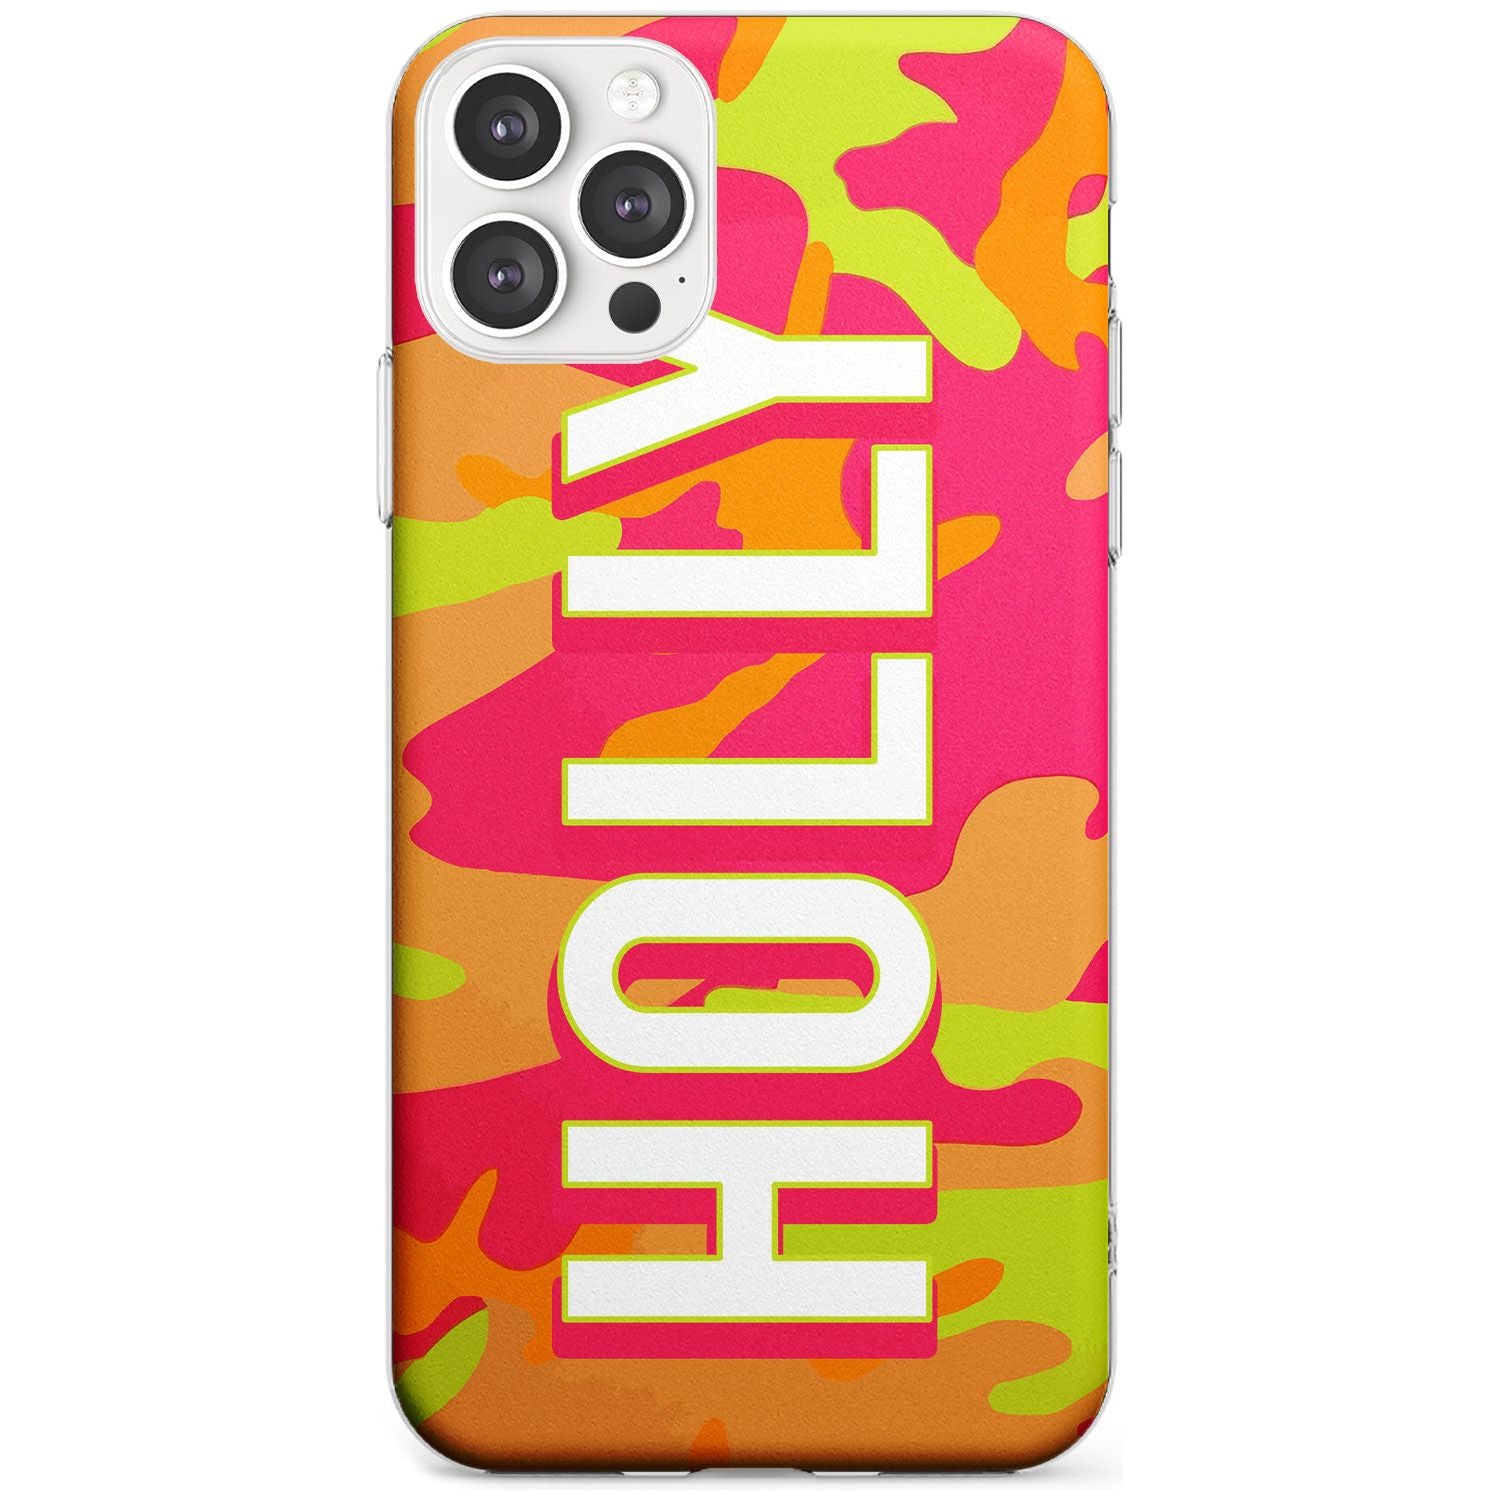 Colourful Neon Camo Black Impact Phone Case for iPhone 11 Pro Max